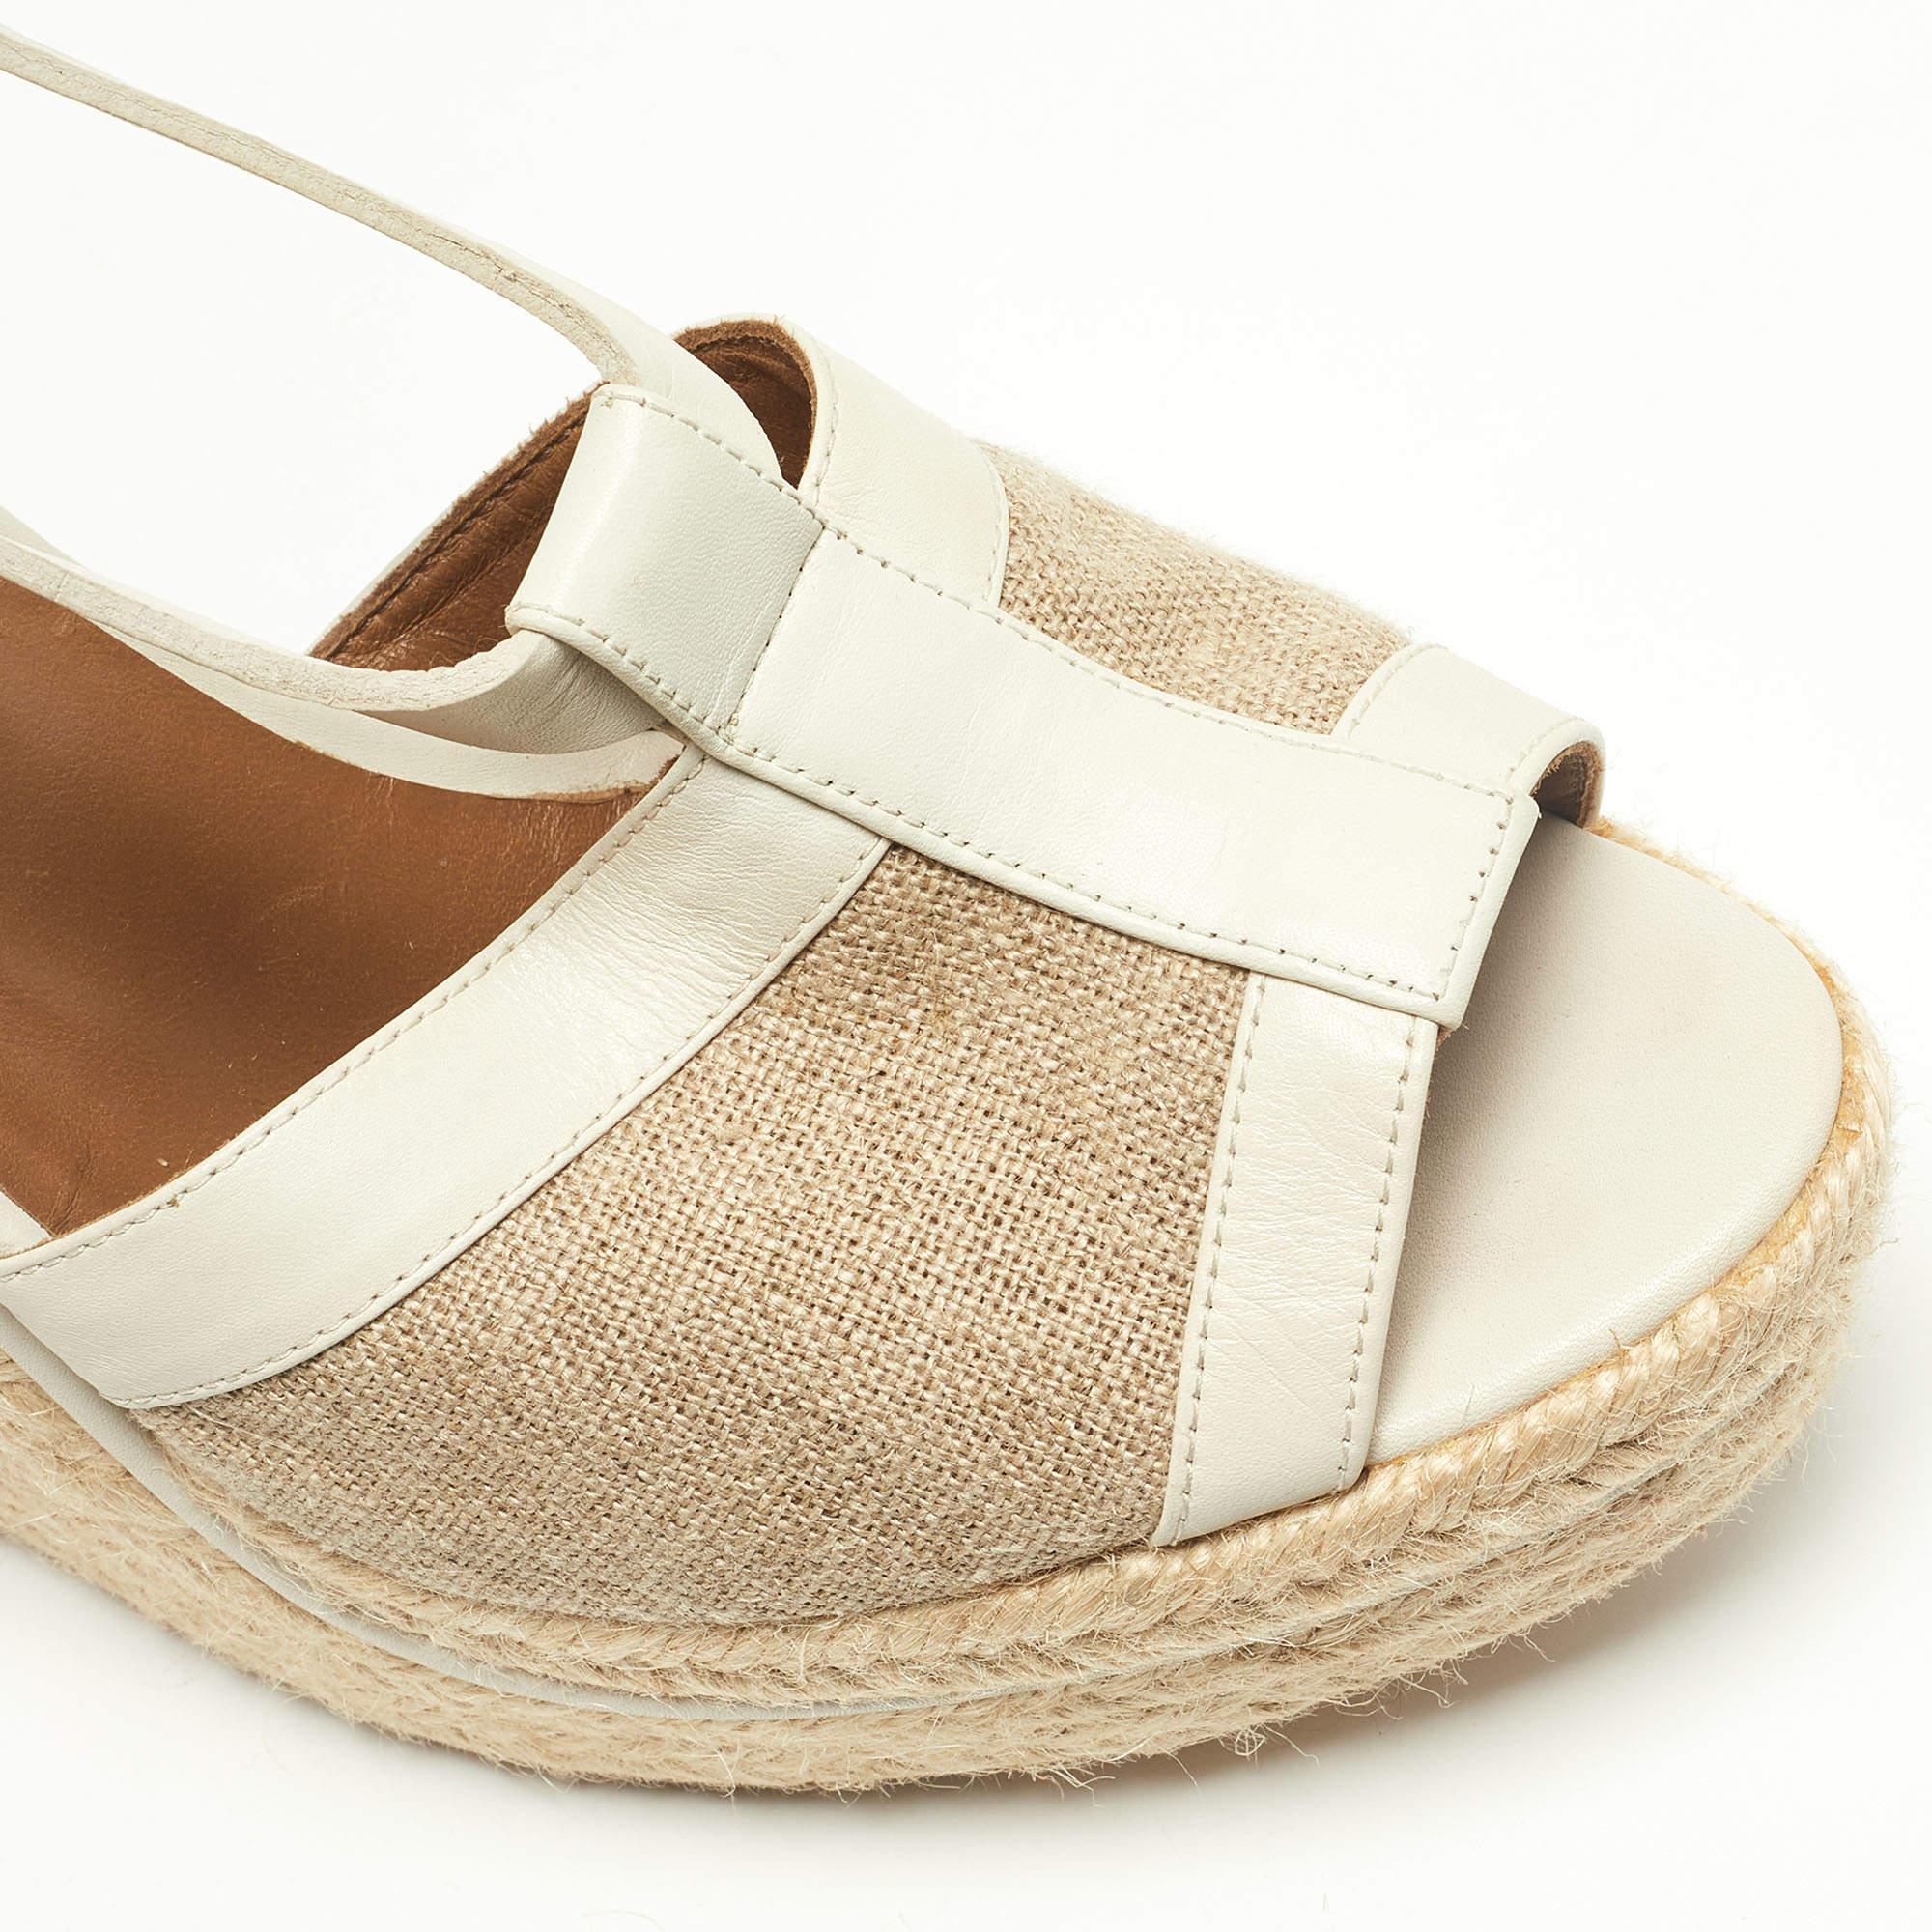 Hermes White/Beige Leather and Canvas Ibiza Espadrille Wedge Sandals Size 39 4